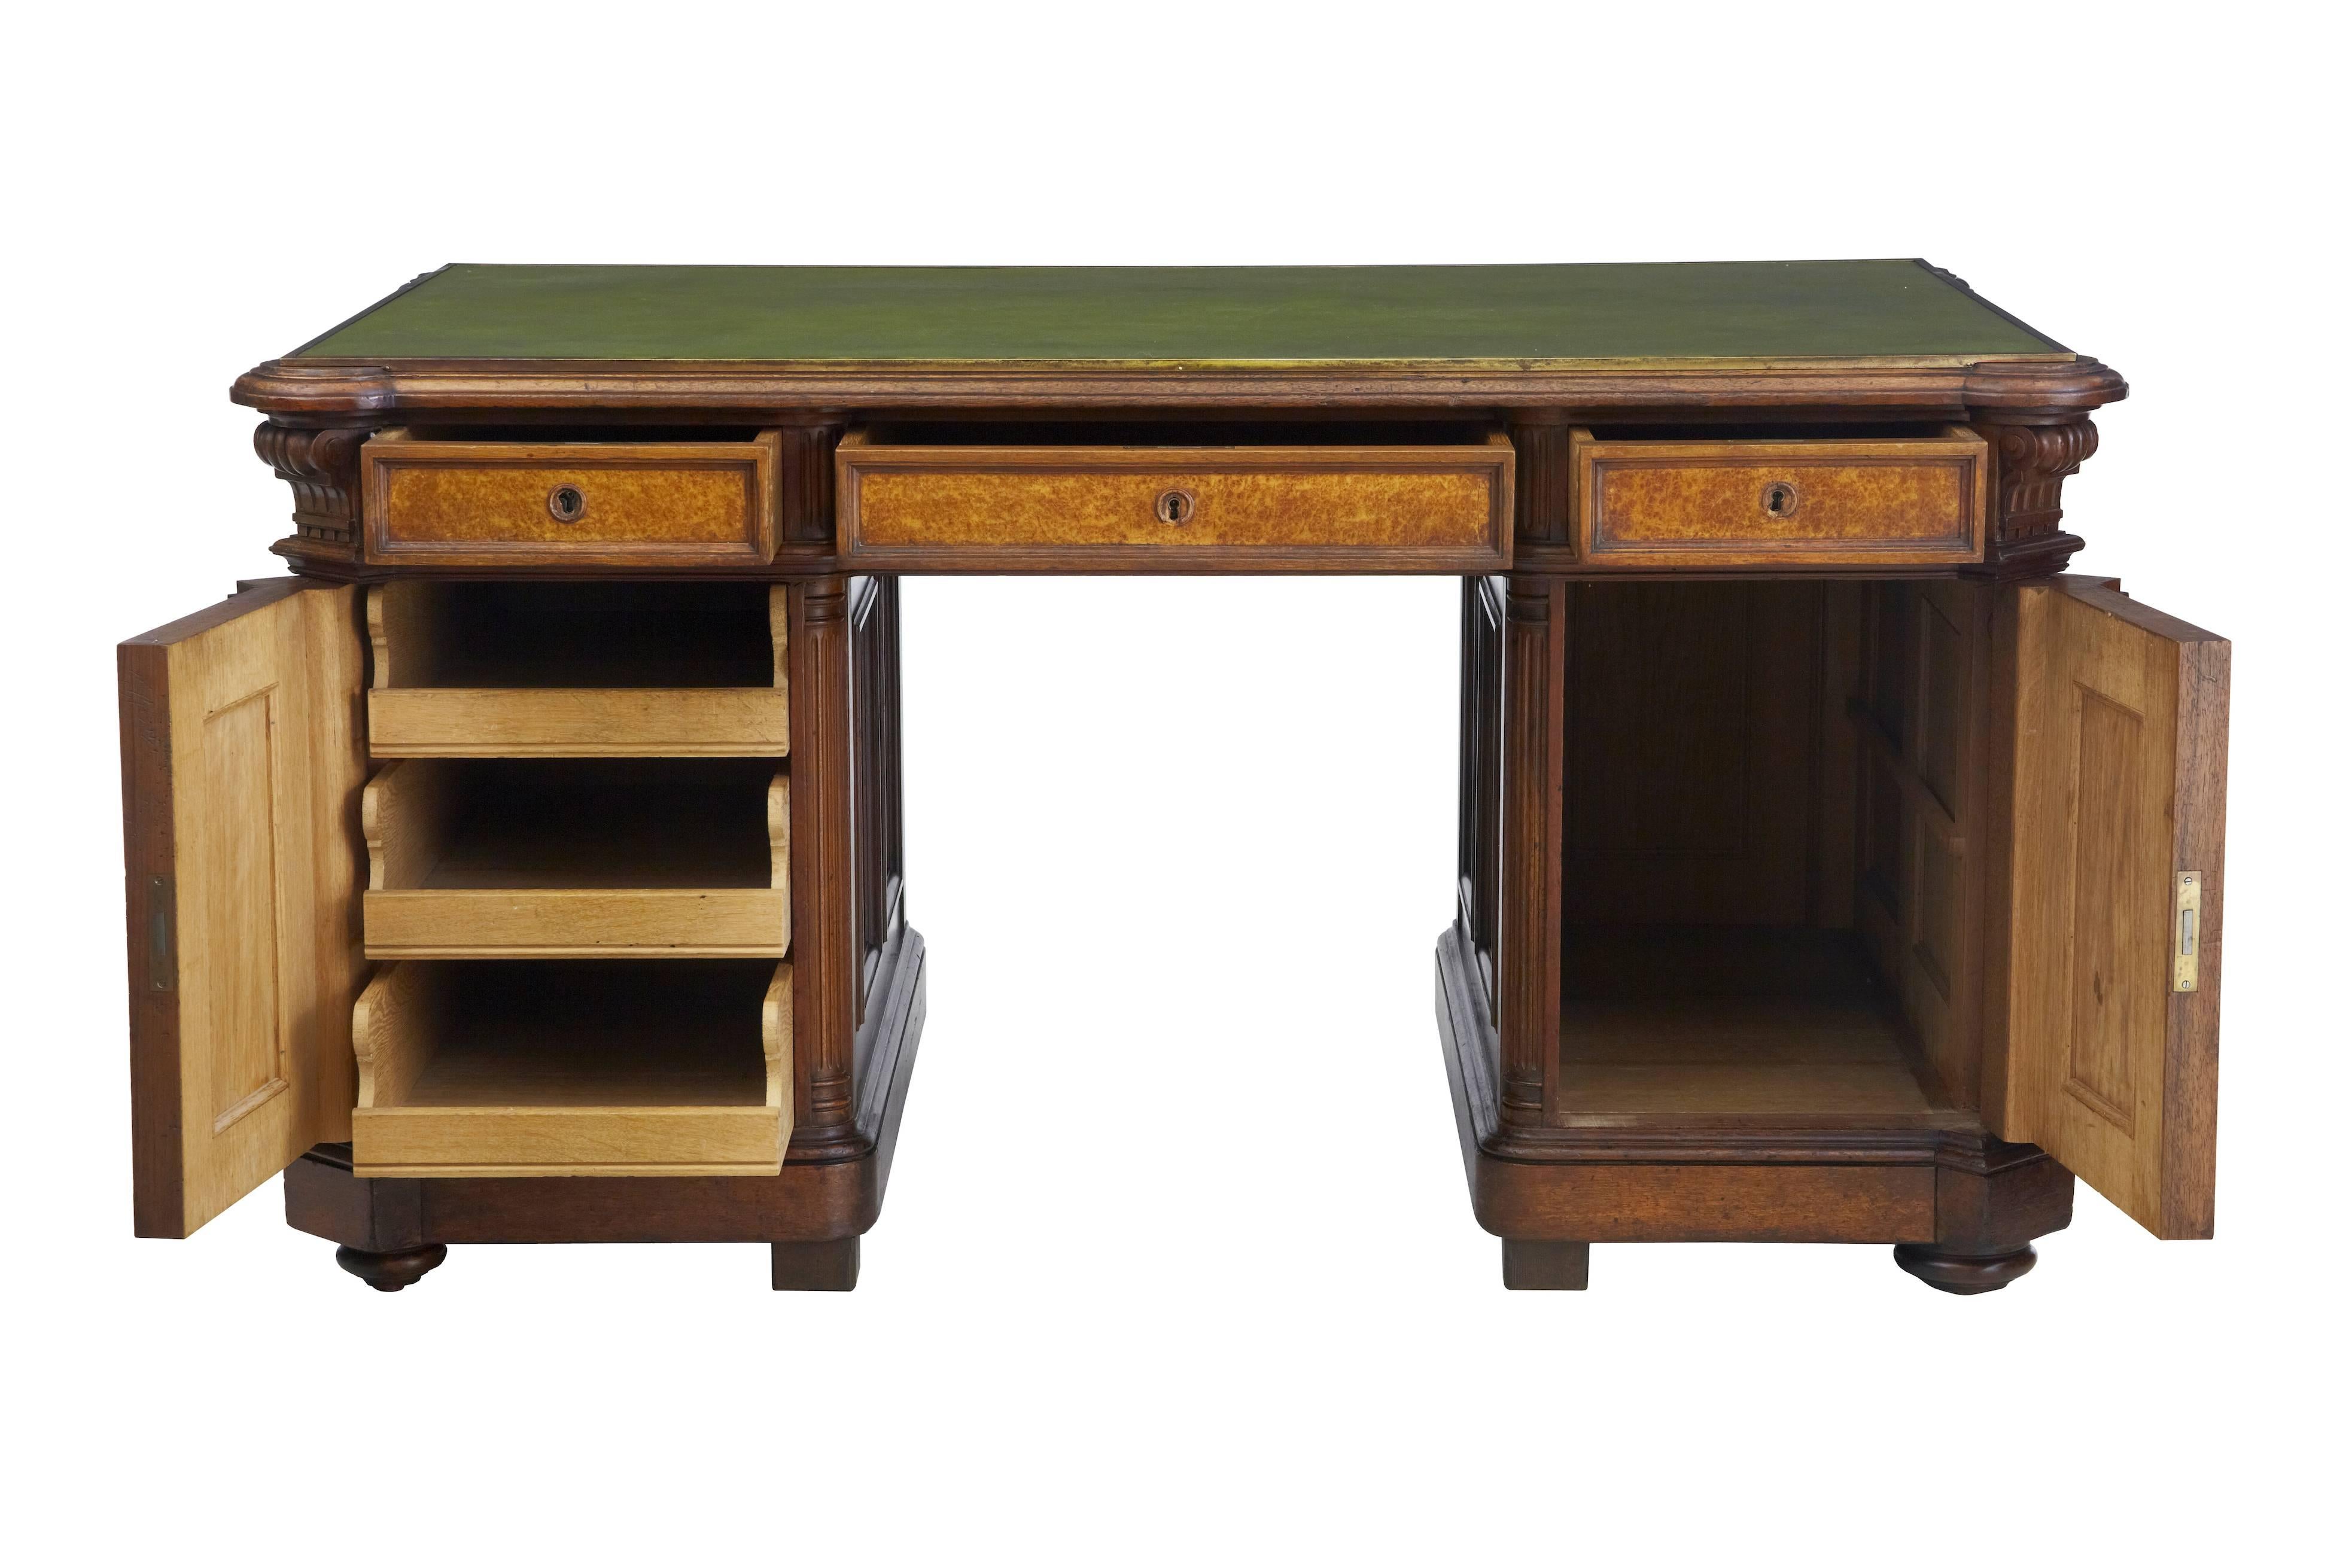 Good quality victorian oak and walnut desk, circa 1890.
One-piece.
Green leather top writing surface with brass edging.
Three drawers in the top, three slide drawers in the left pedestal. Right hand side currently with missing shelf (will be